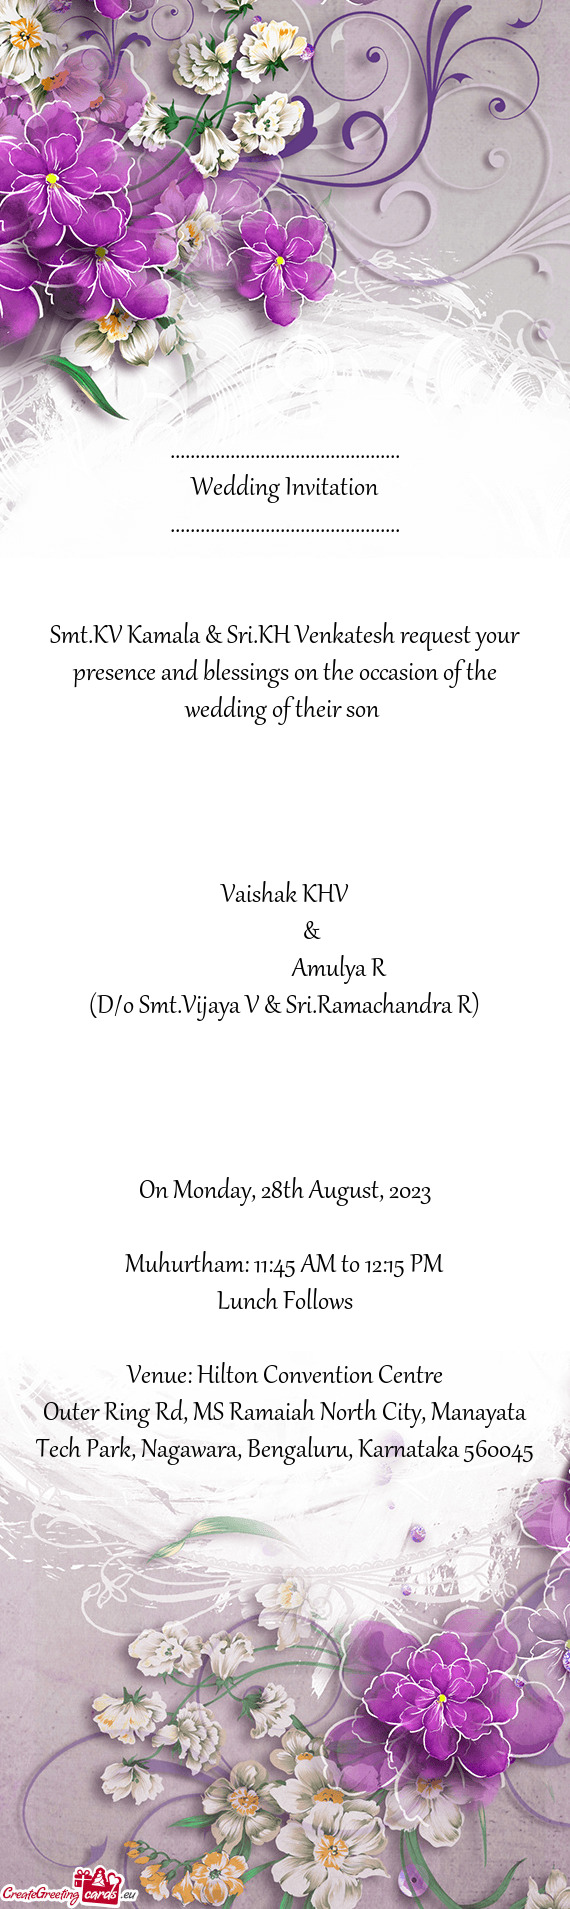 Smt.KV Kamala & Sri.KH Venkatesh request your presence and blessings on the occasion of the wedding